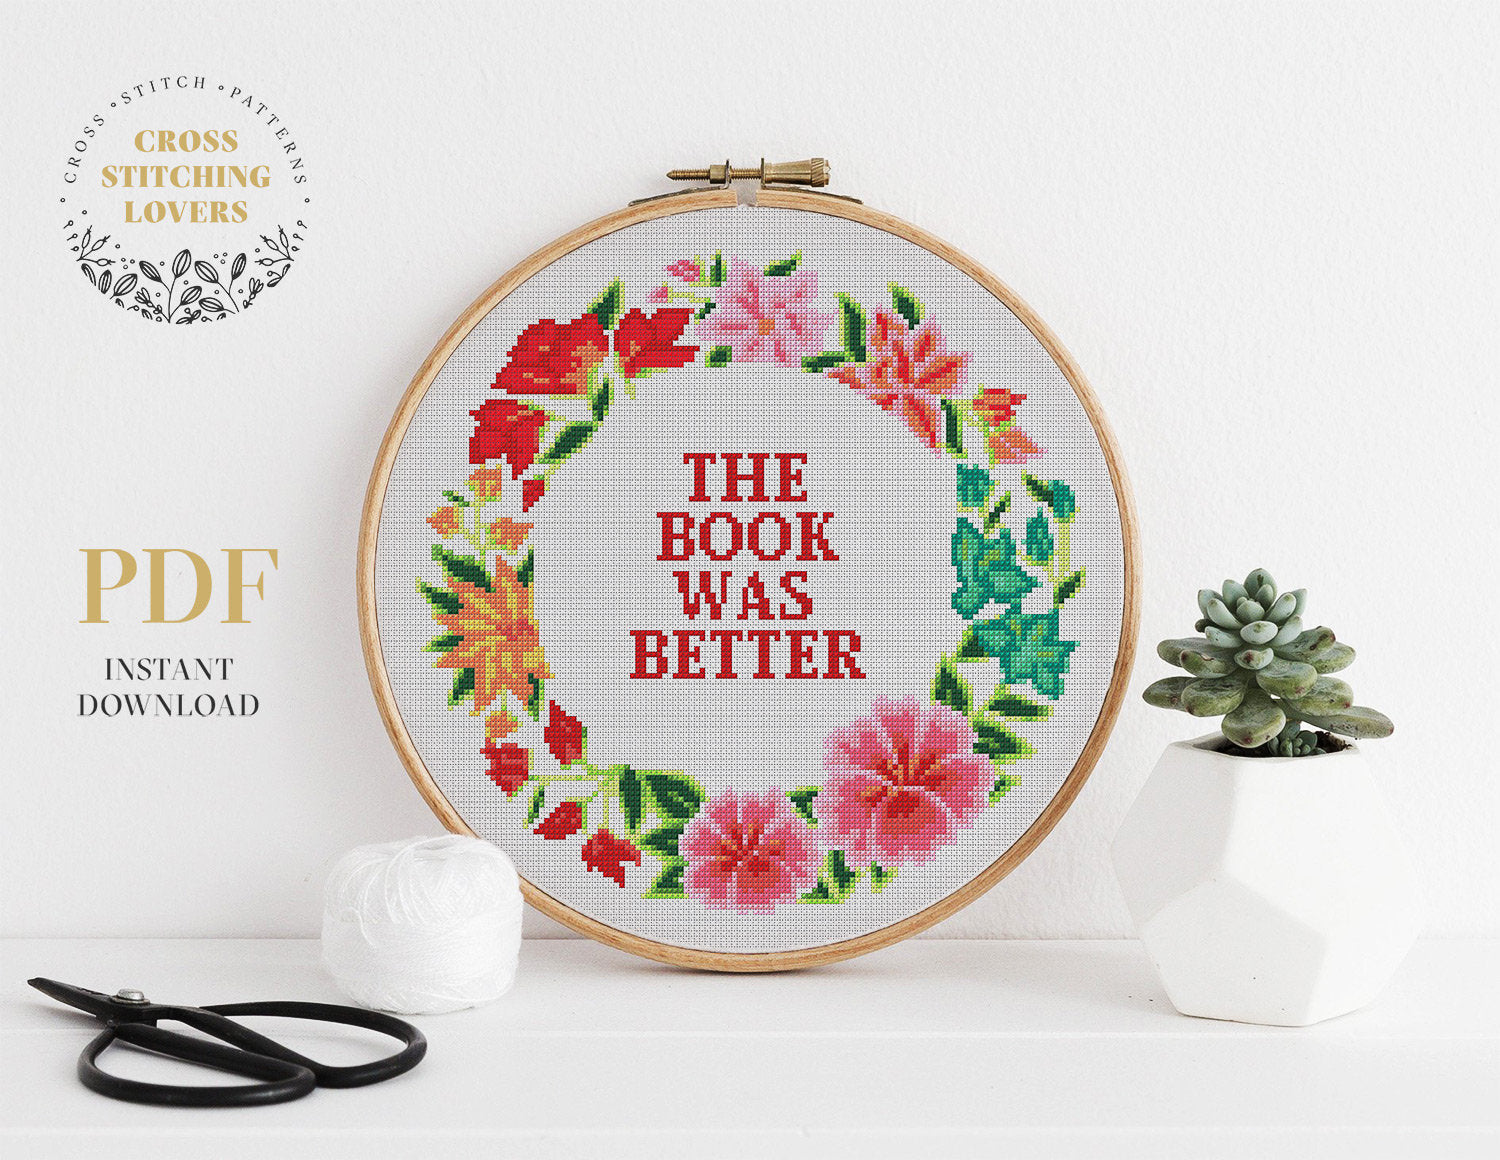 The Book Was Better - Cross stitch pattern